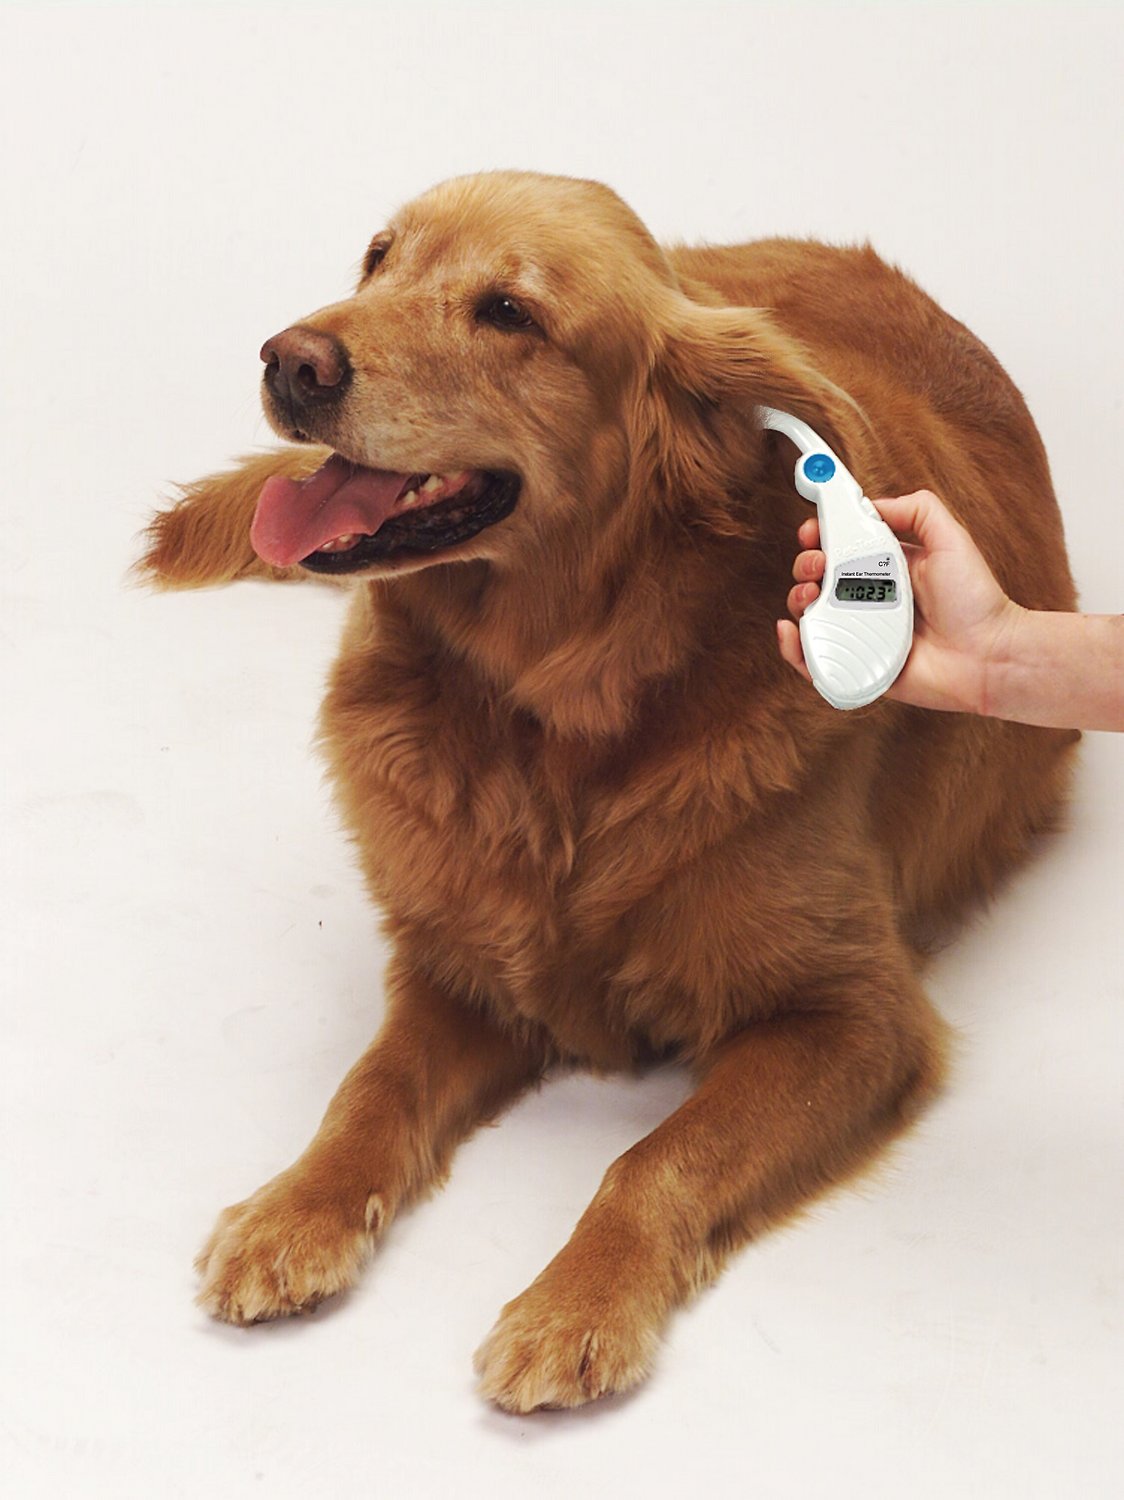 https://www.rover.com/blog/wp-content/uploads/pet-temp-ear-thermometer-with-dog.jpg